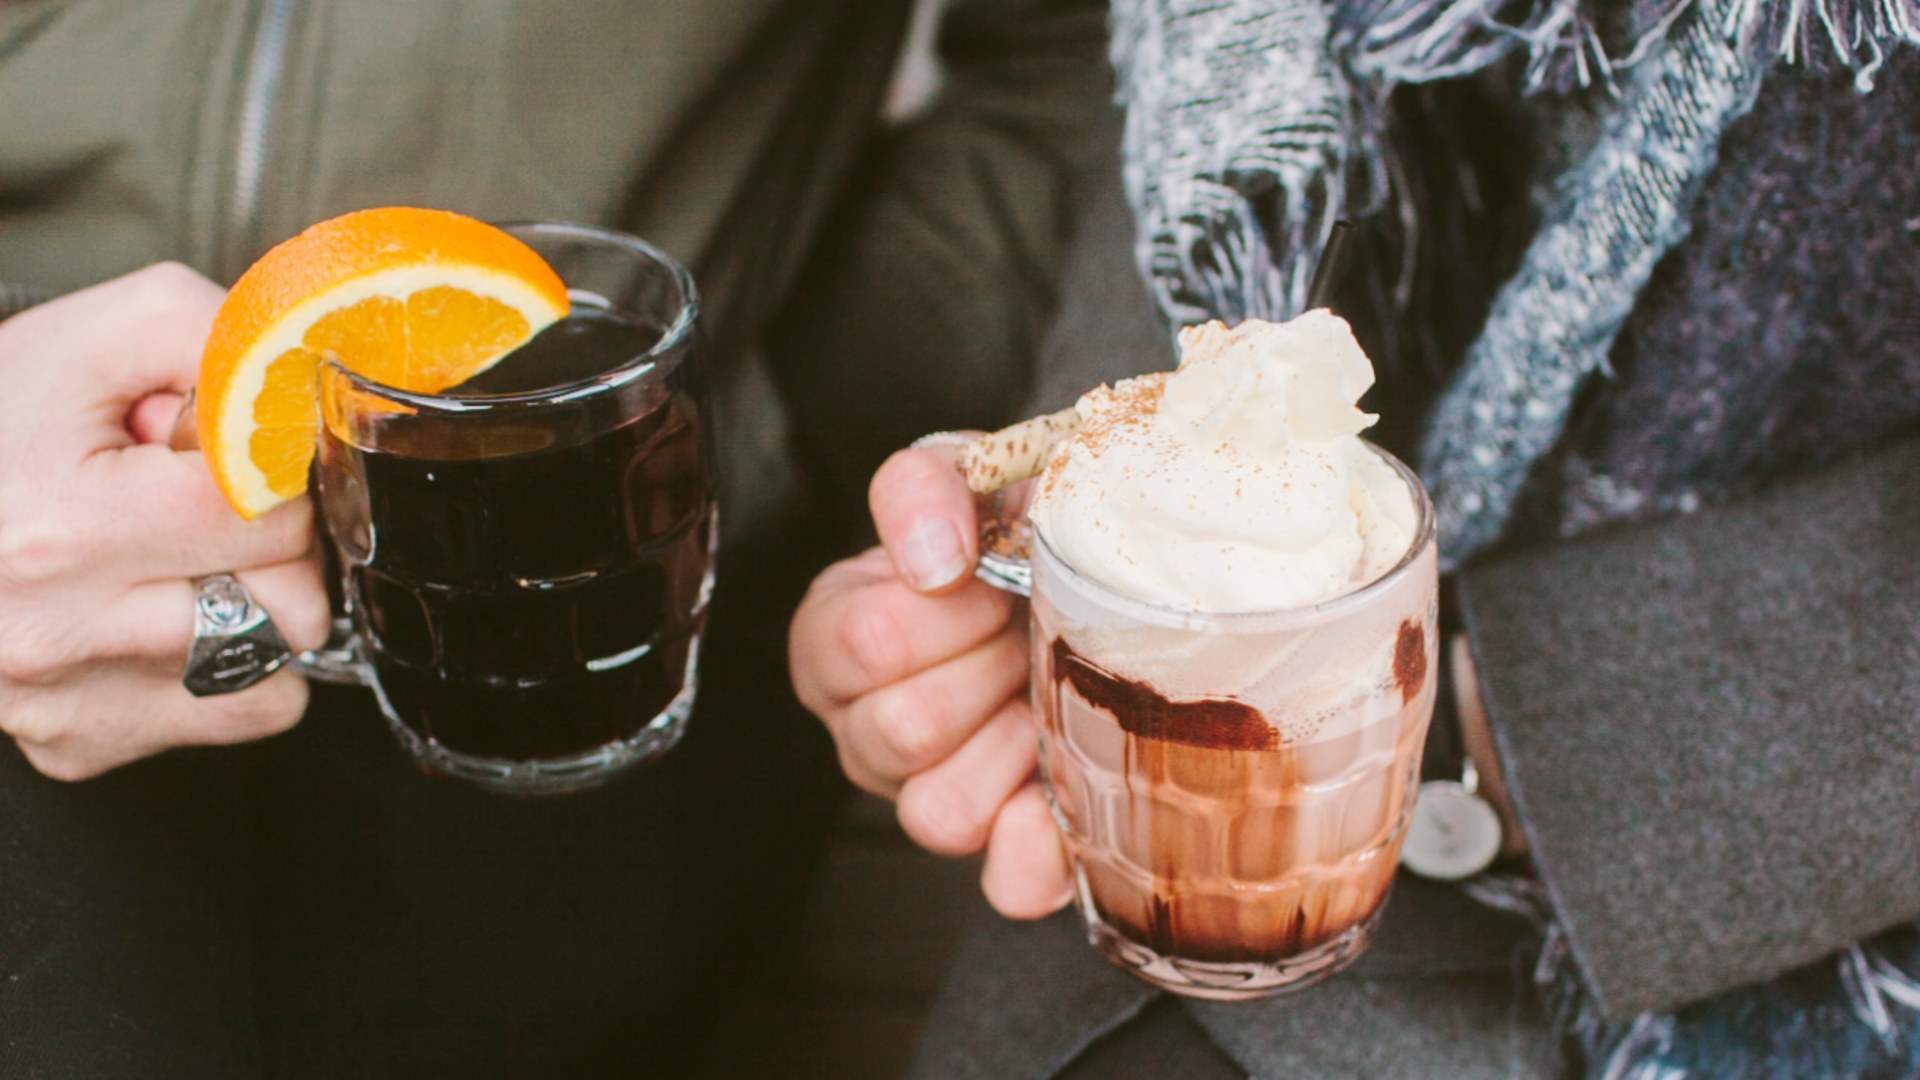 Melbourne's Riverland Has Created a Nostalgic Booze-Infused Hot Milo to Warm You Up This Winter